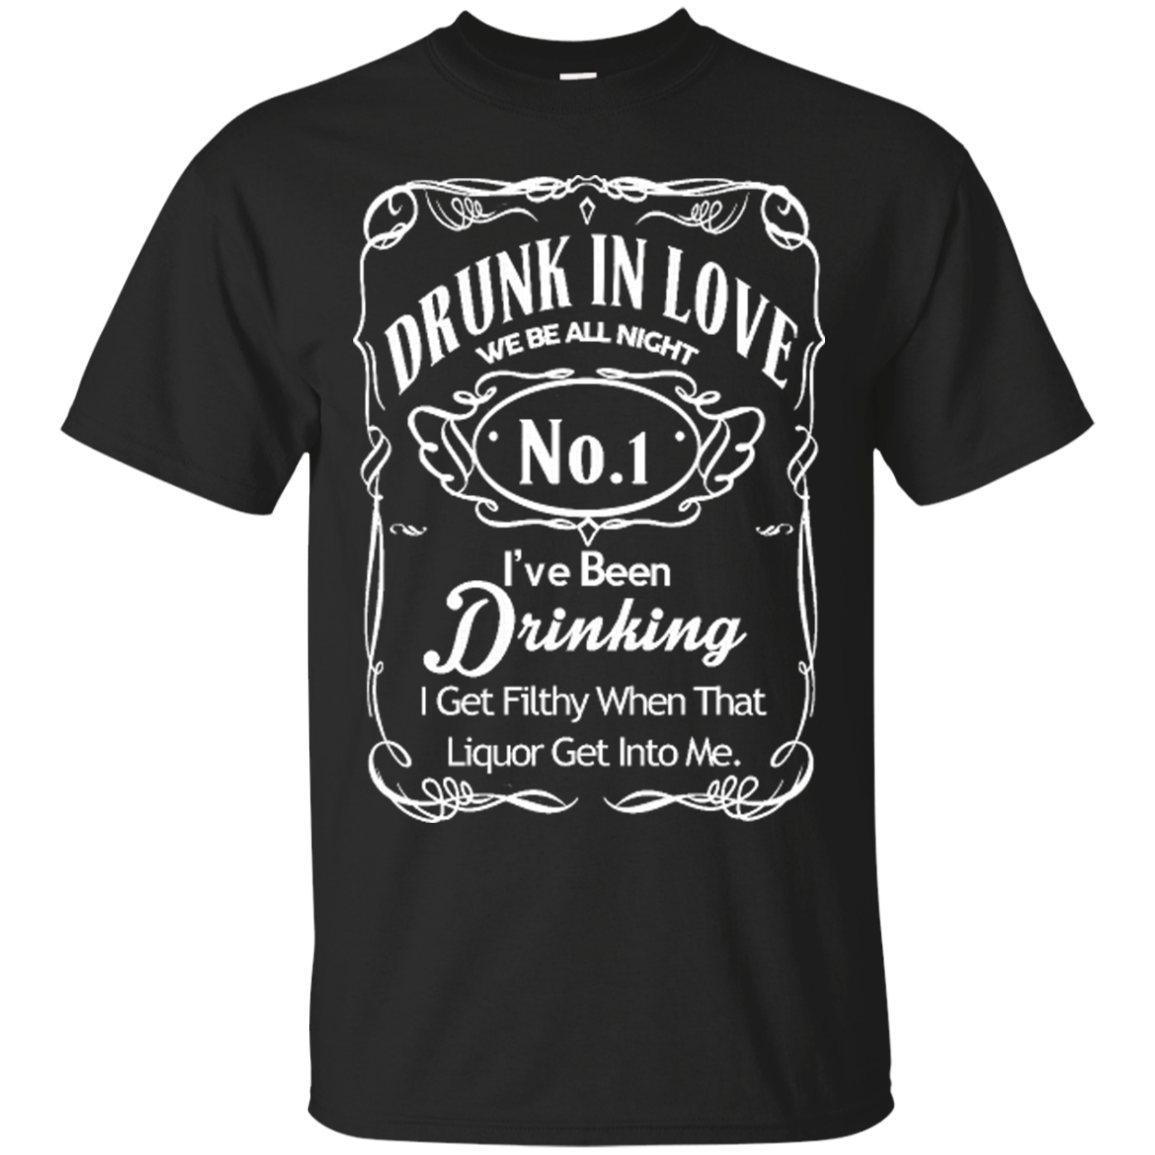 Beyonc Drunk in Love Shirts We Be All Night I've Been Drinking - Teesmiley